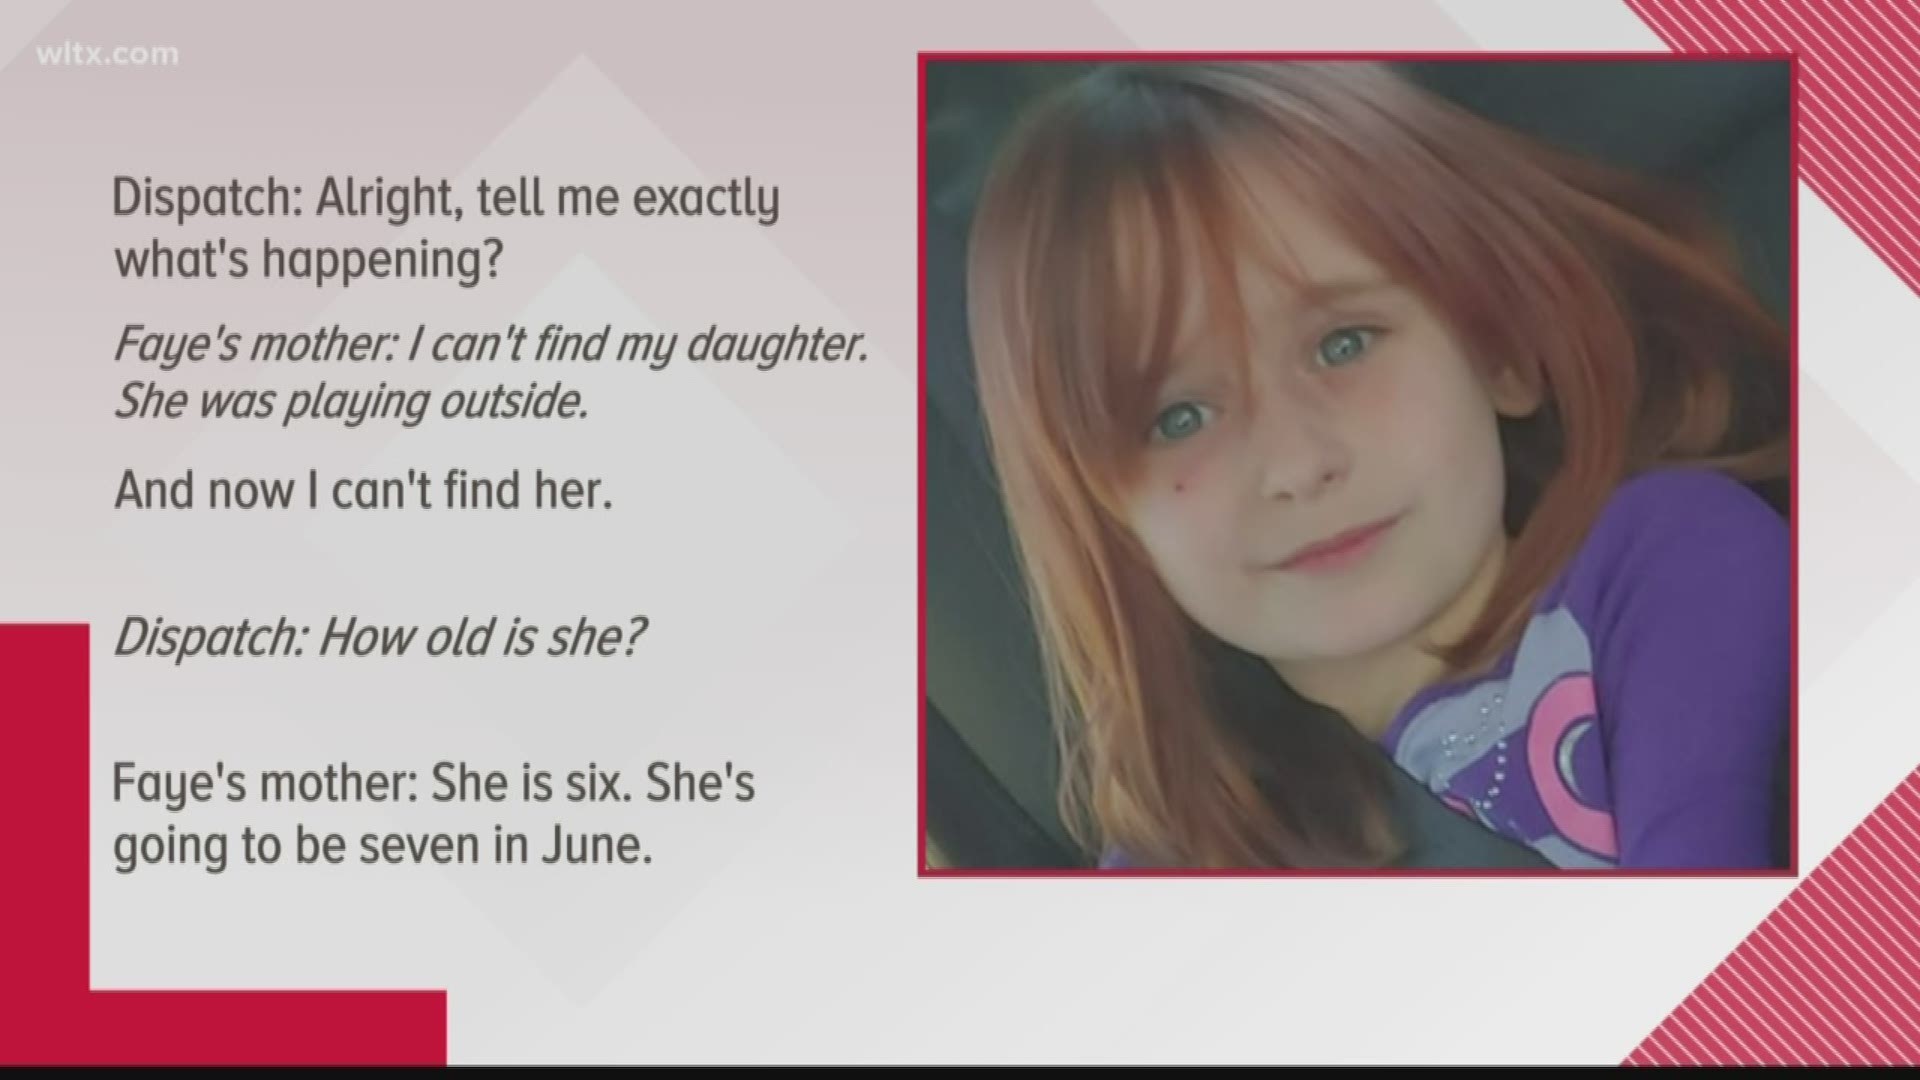 In the call, the mother of Faye Swetlik can be heard pleading with police to help find her daughter.